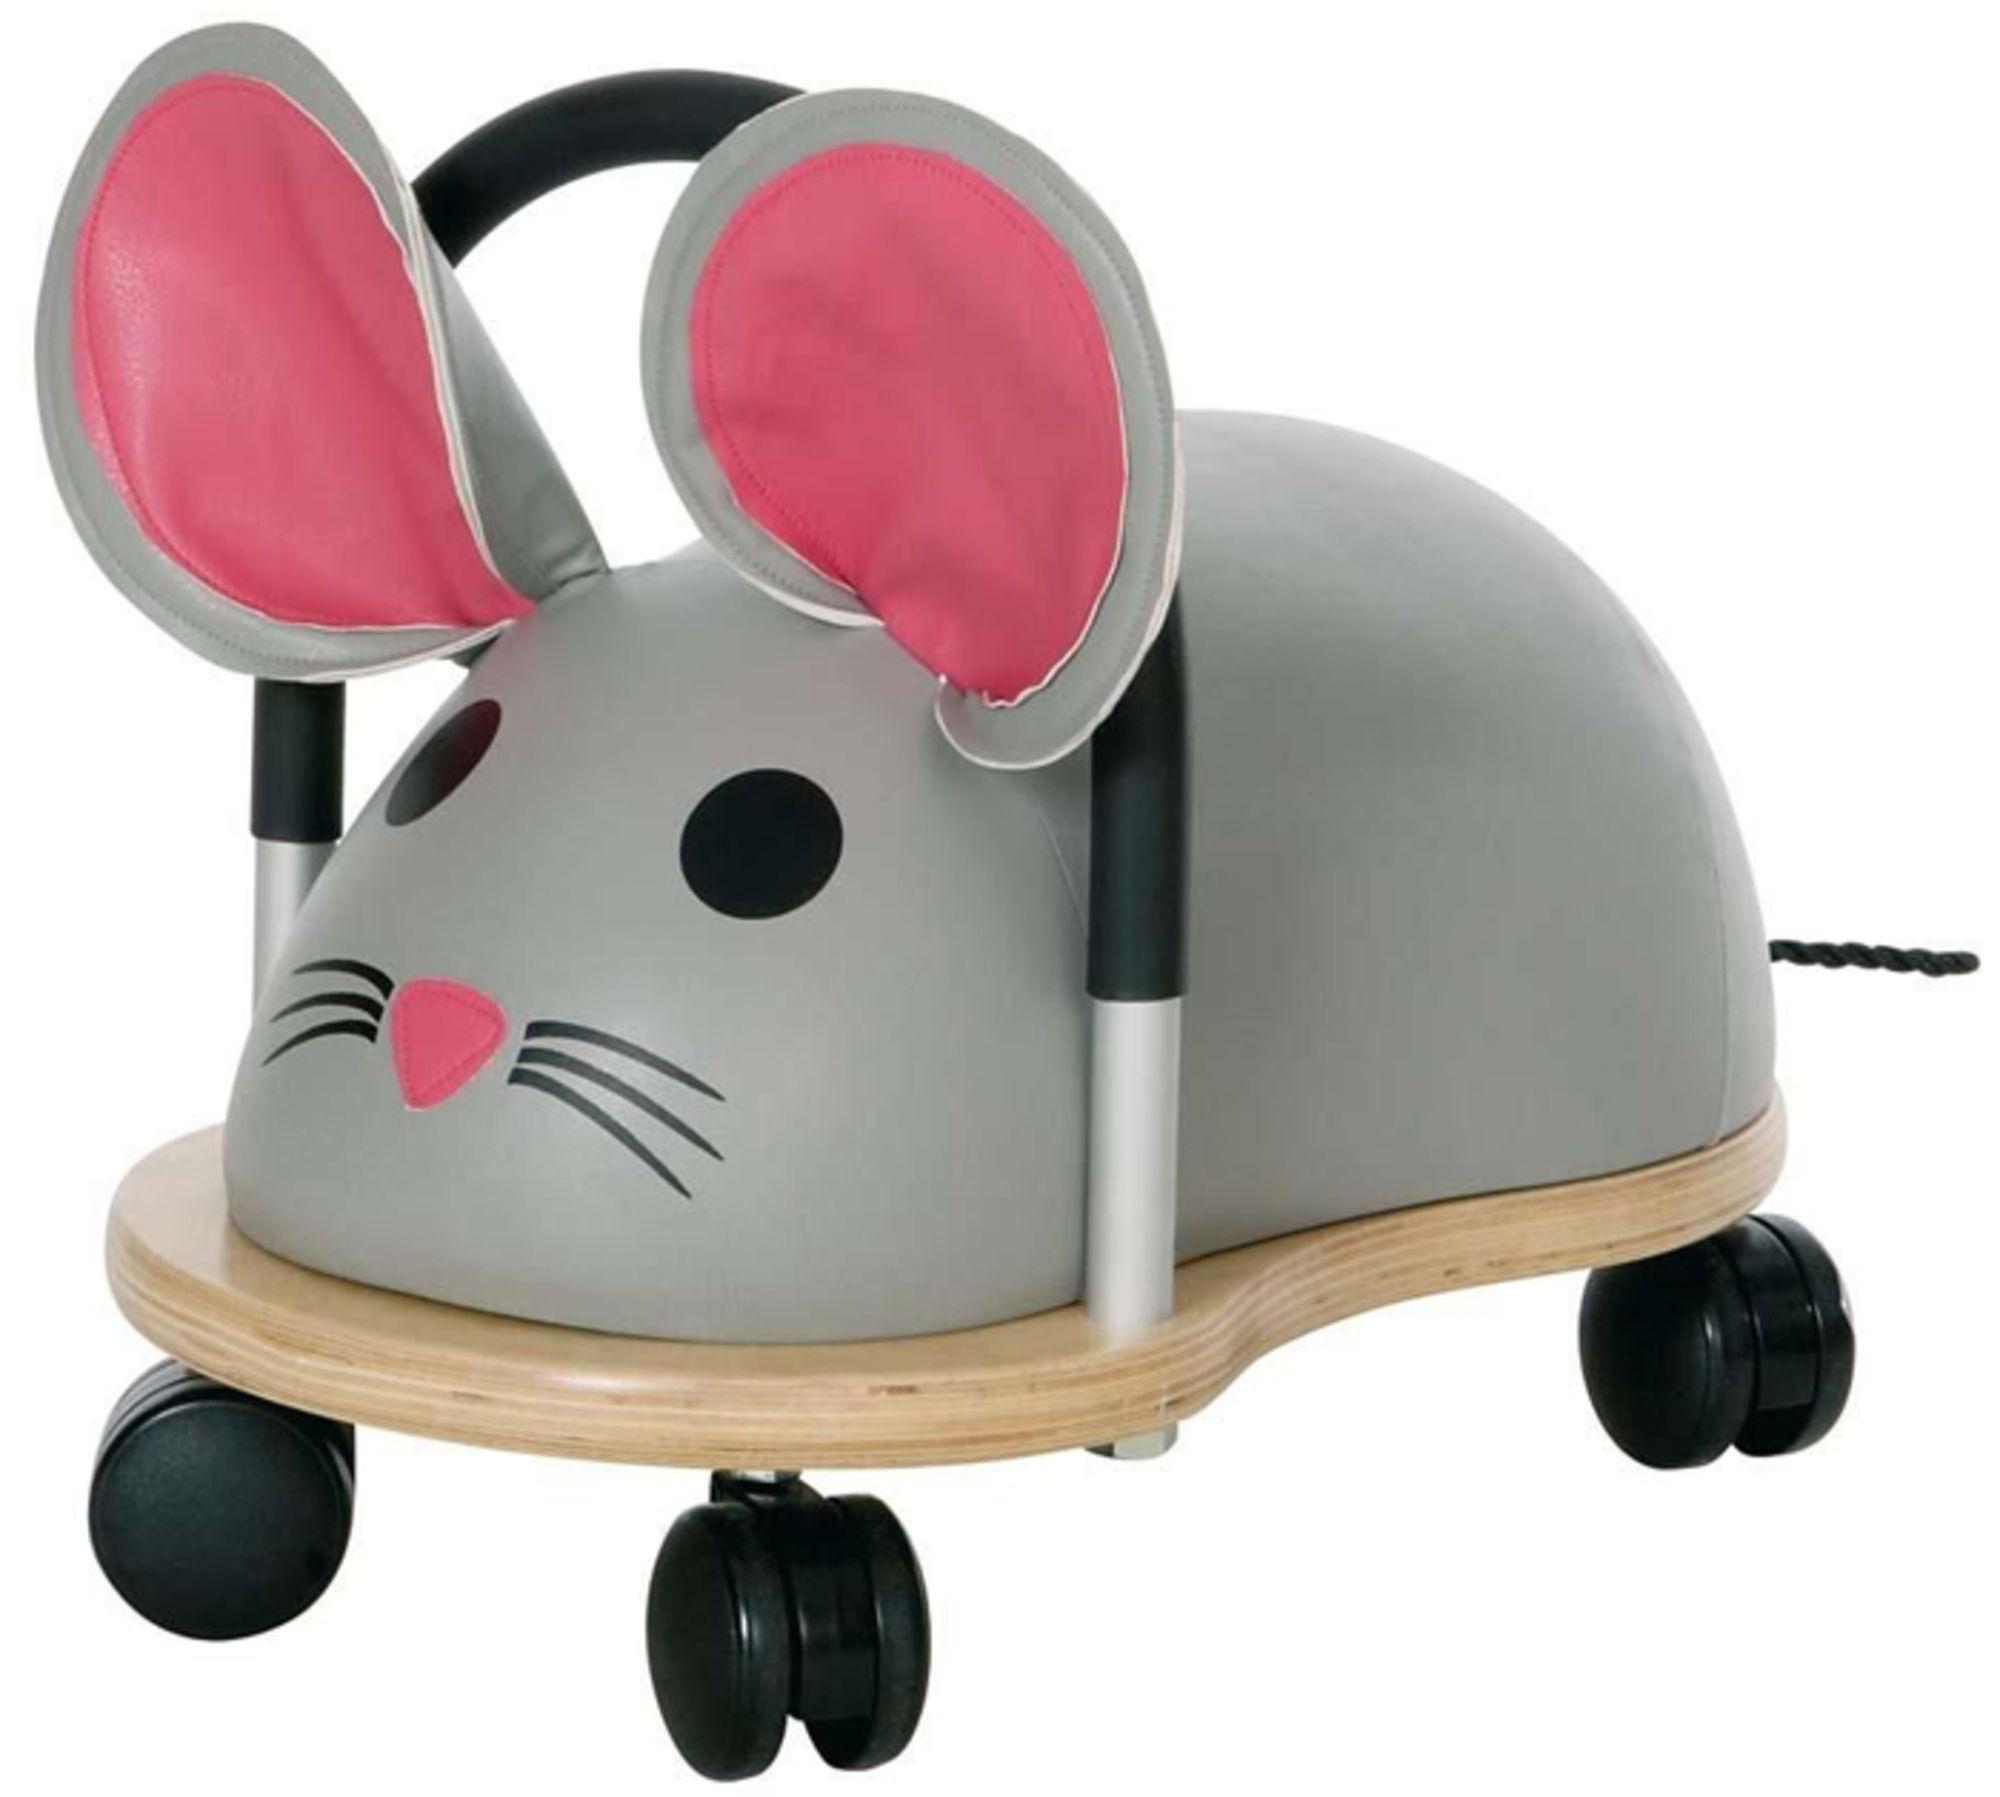 WHEELY MOUSE LG